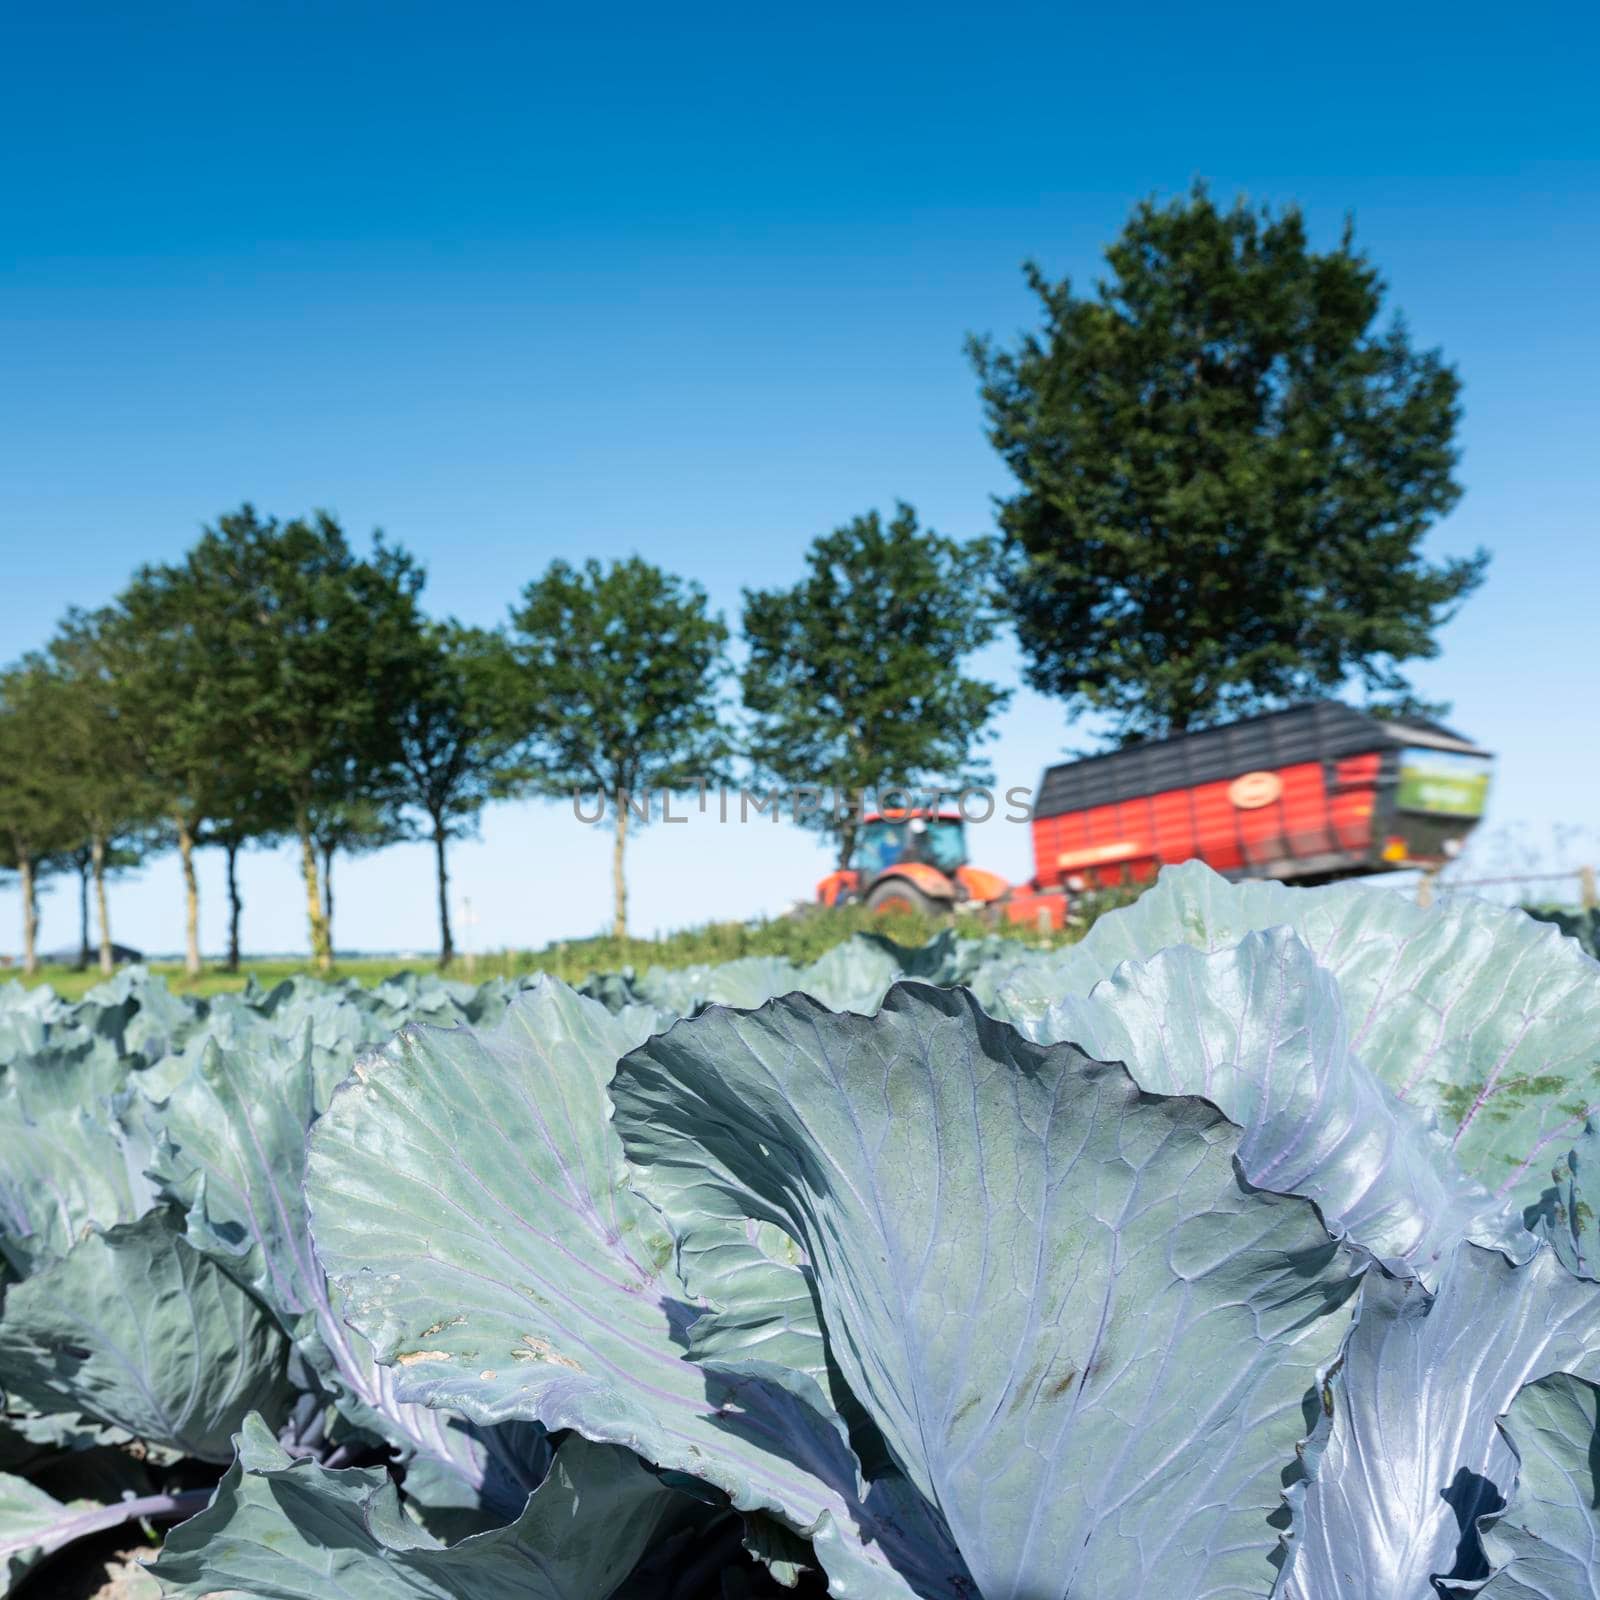 tractor and wagon pass red cabbage field under blue sky in dutch province of noord holland in the netherlands